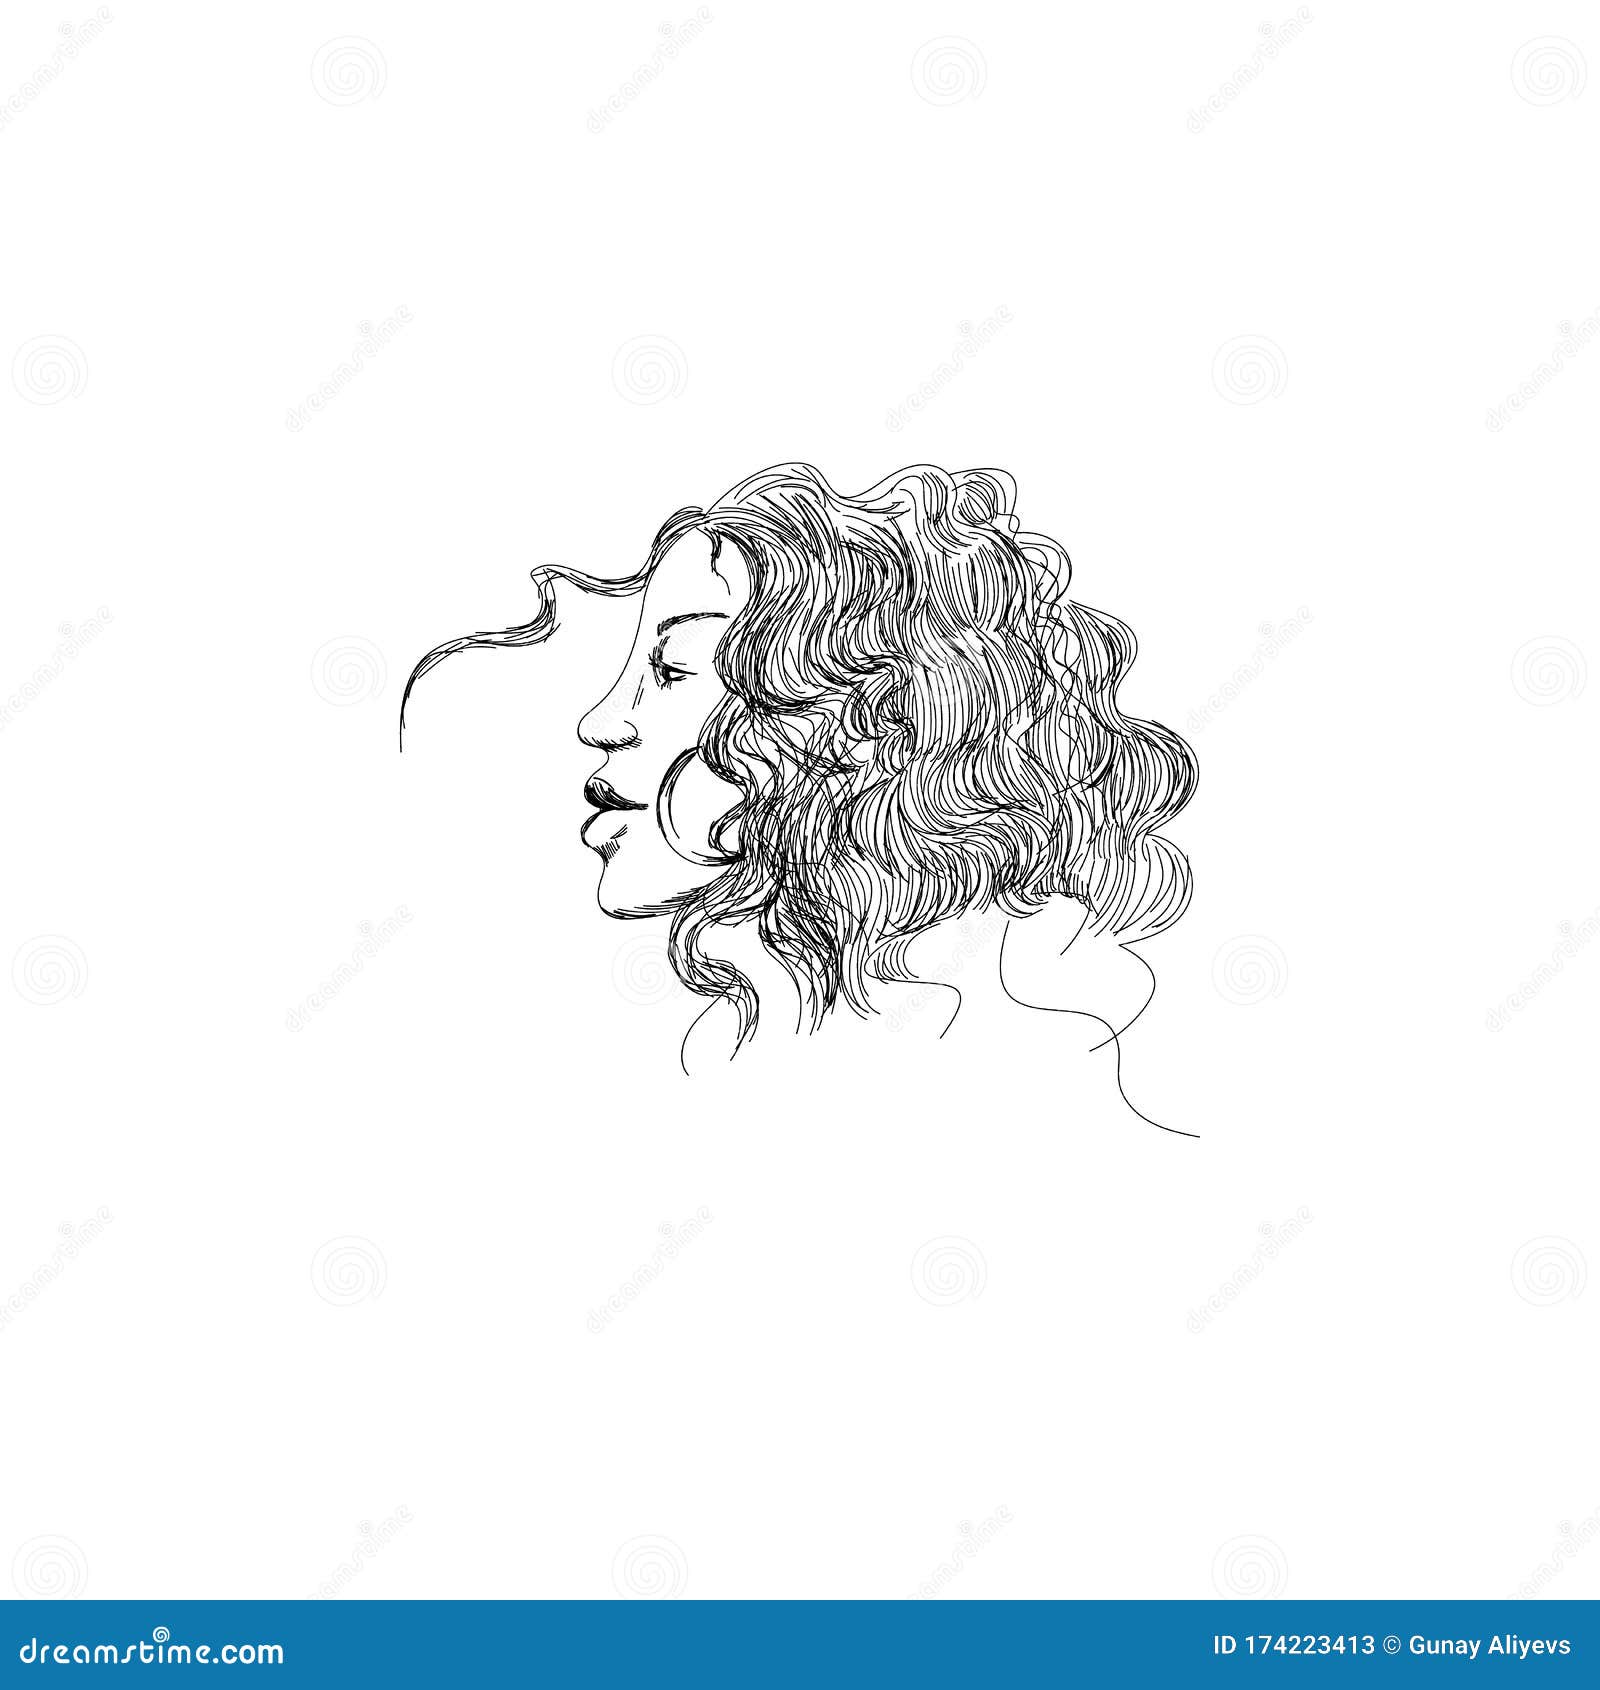 How to Draw Curly Hair: Step by Step Art Tutorial - JeyRam Drawing Tutorials